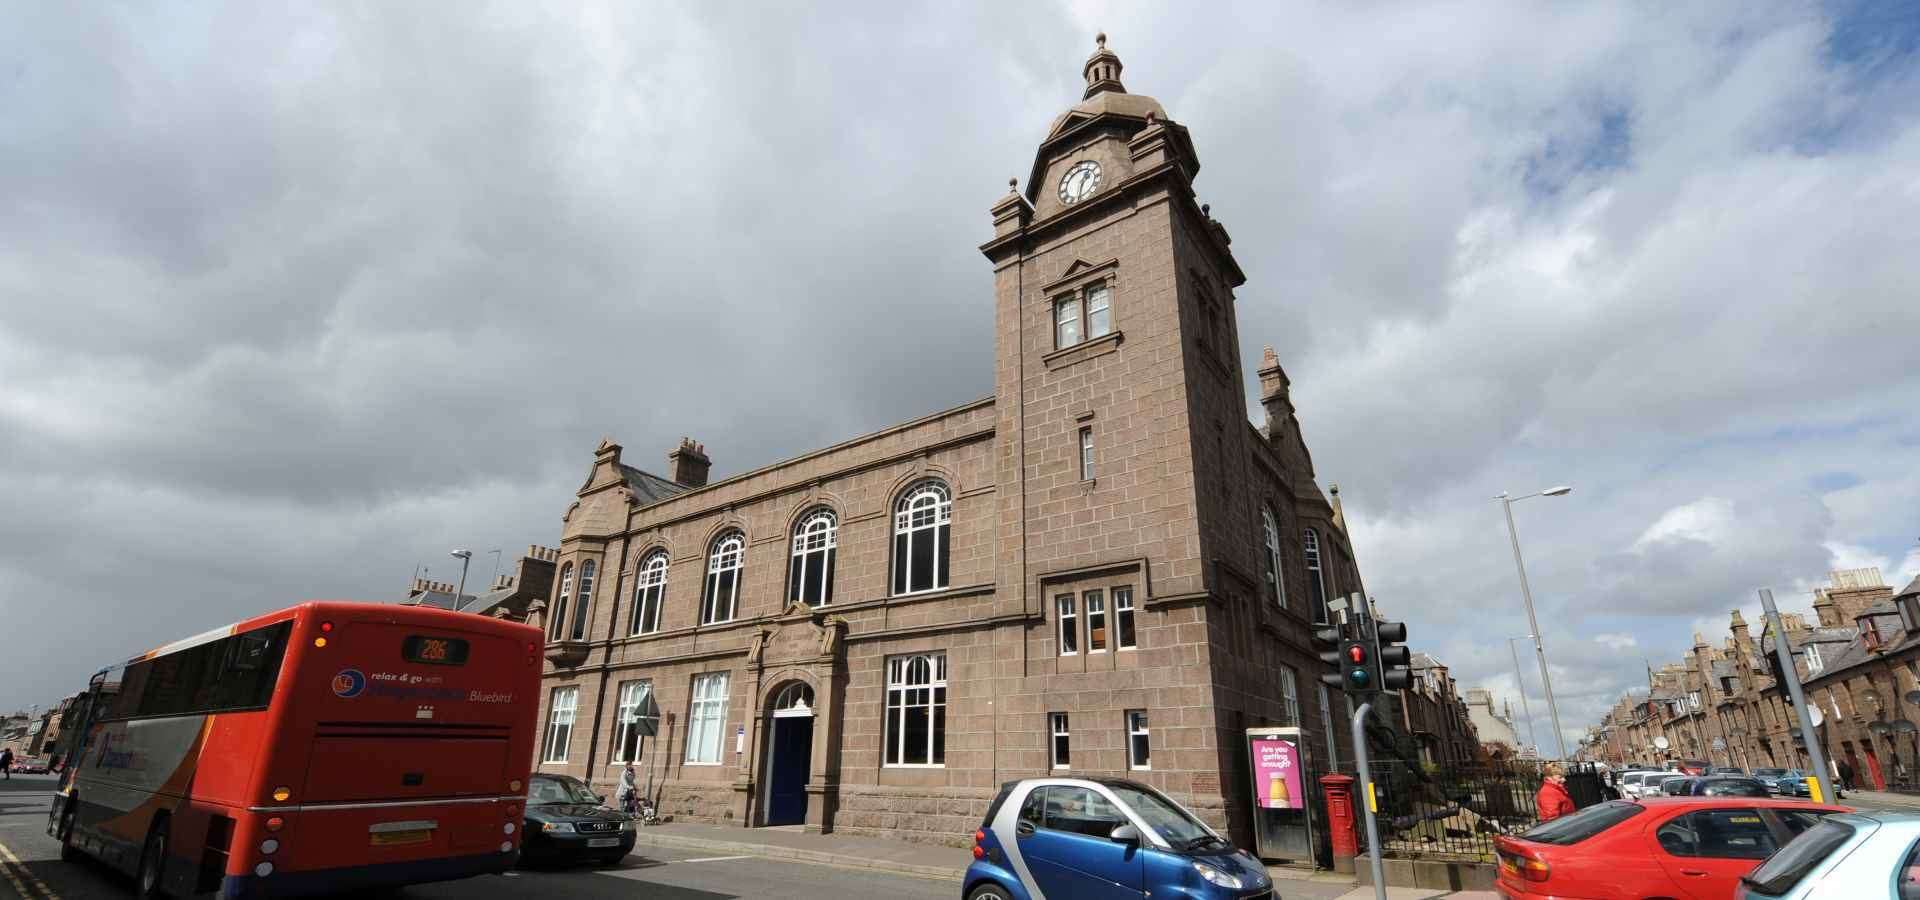 Community Testing wil take place at the Rescue Hall in Peterhead.